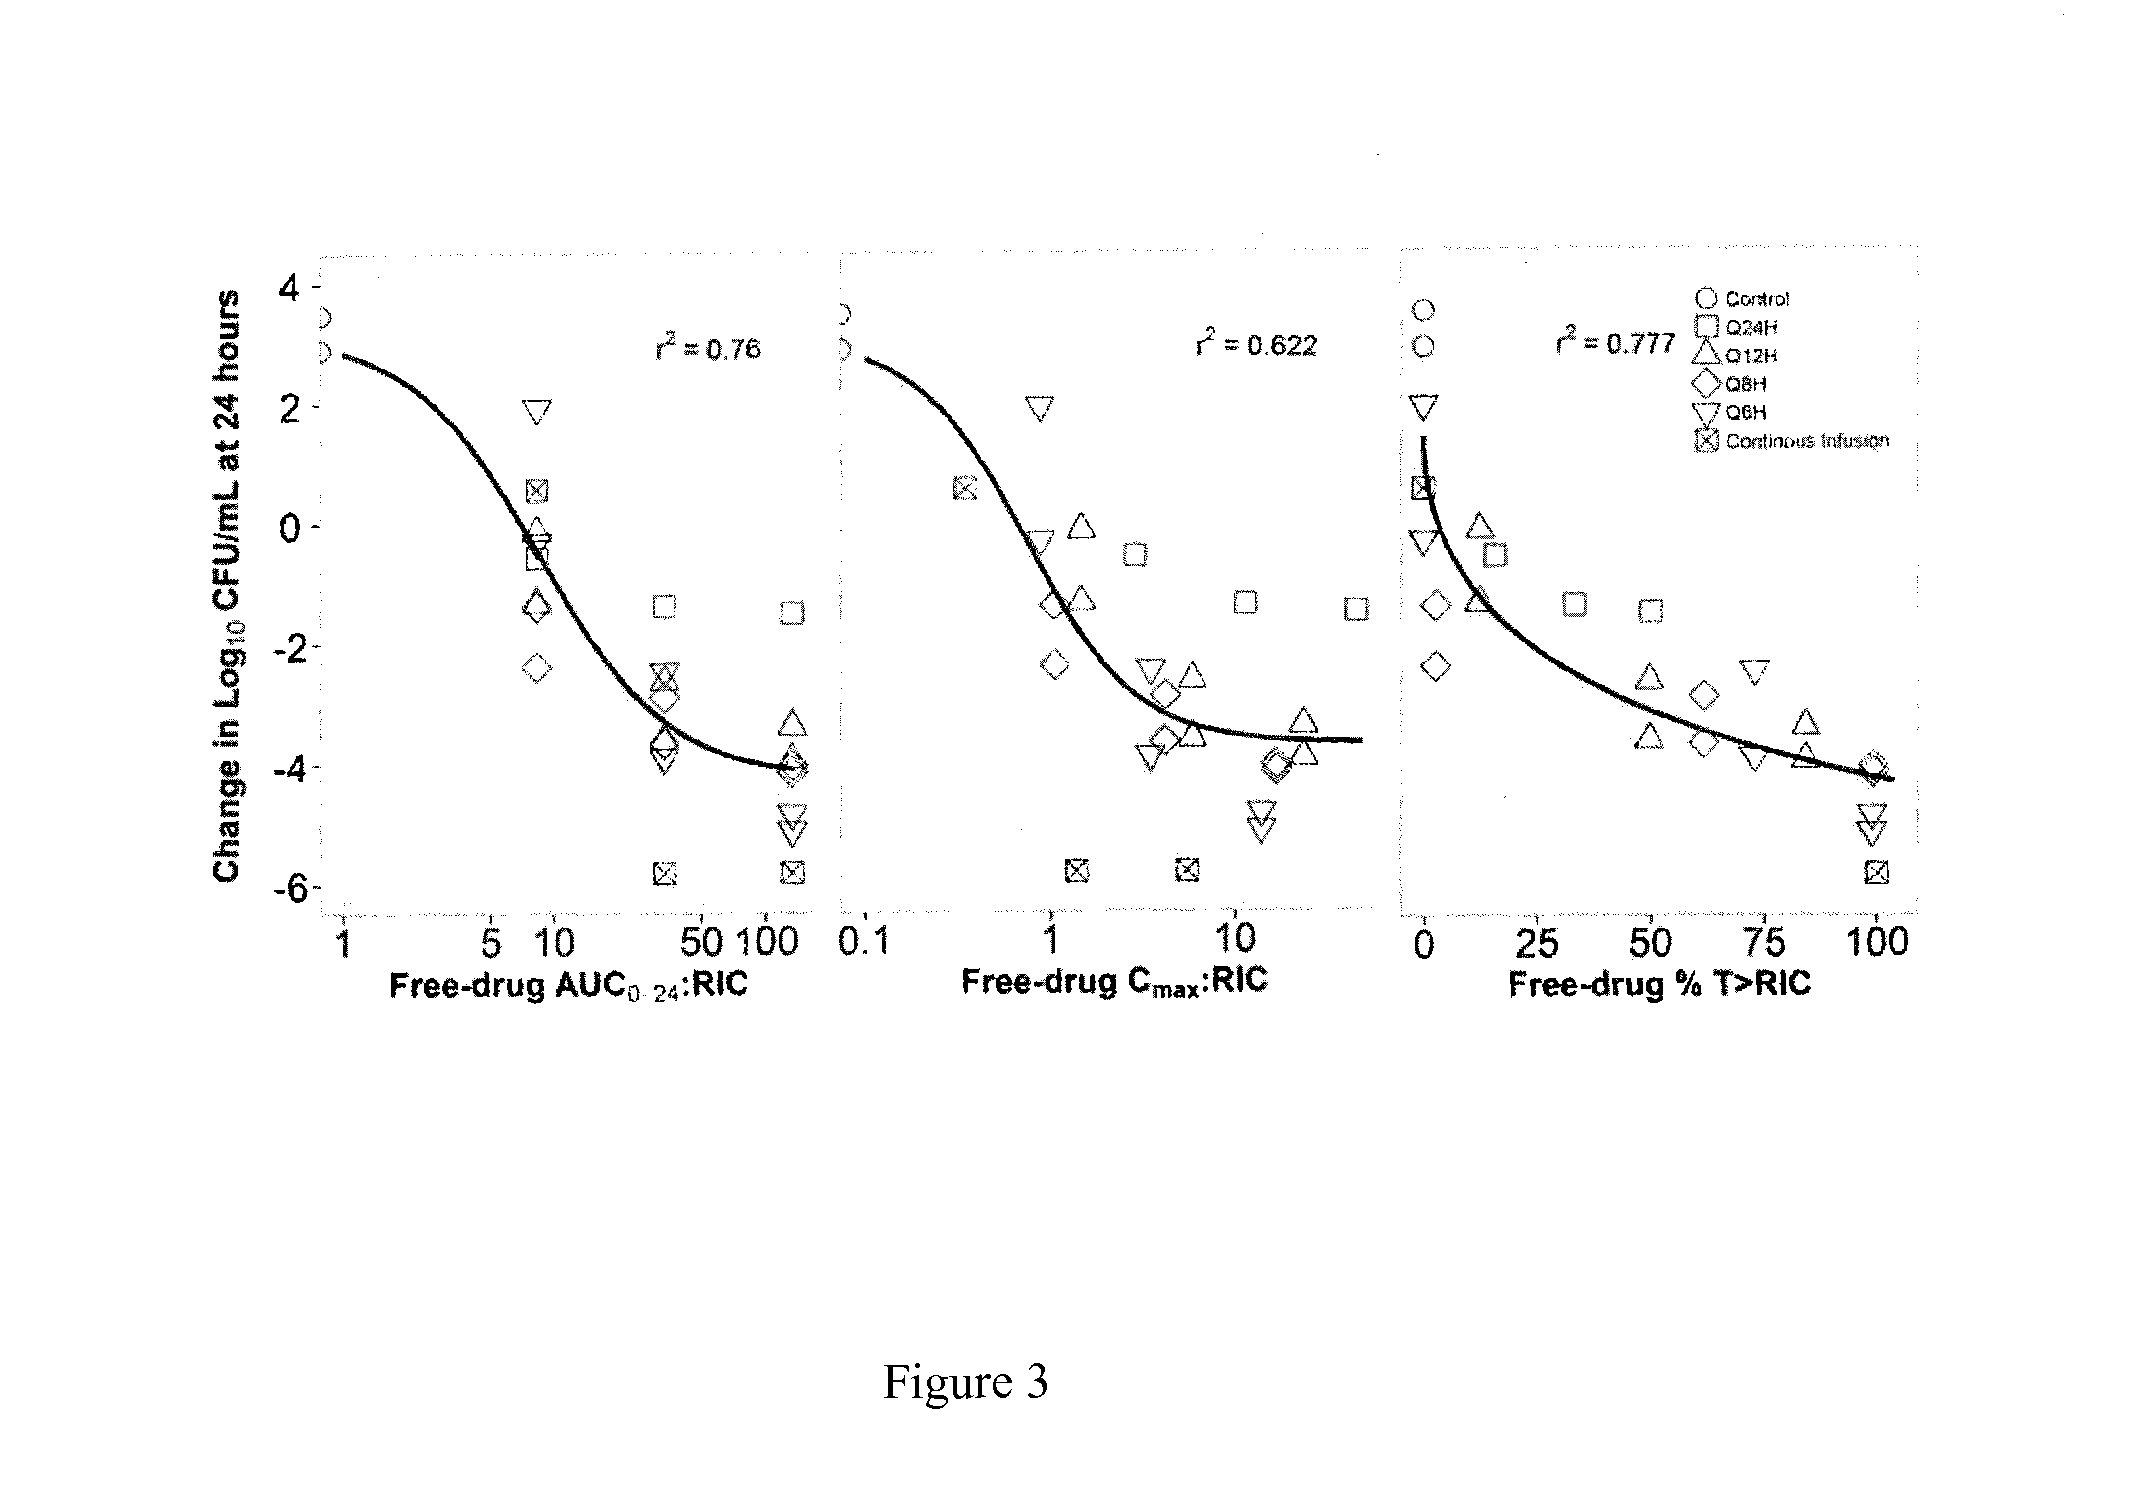 Method for improving drug treatments in mammals